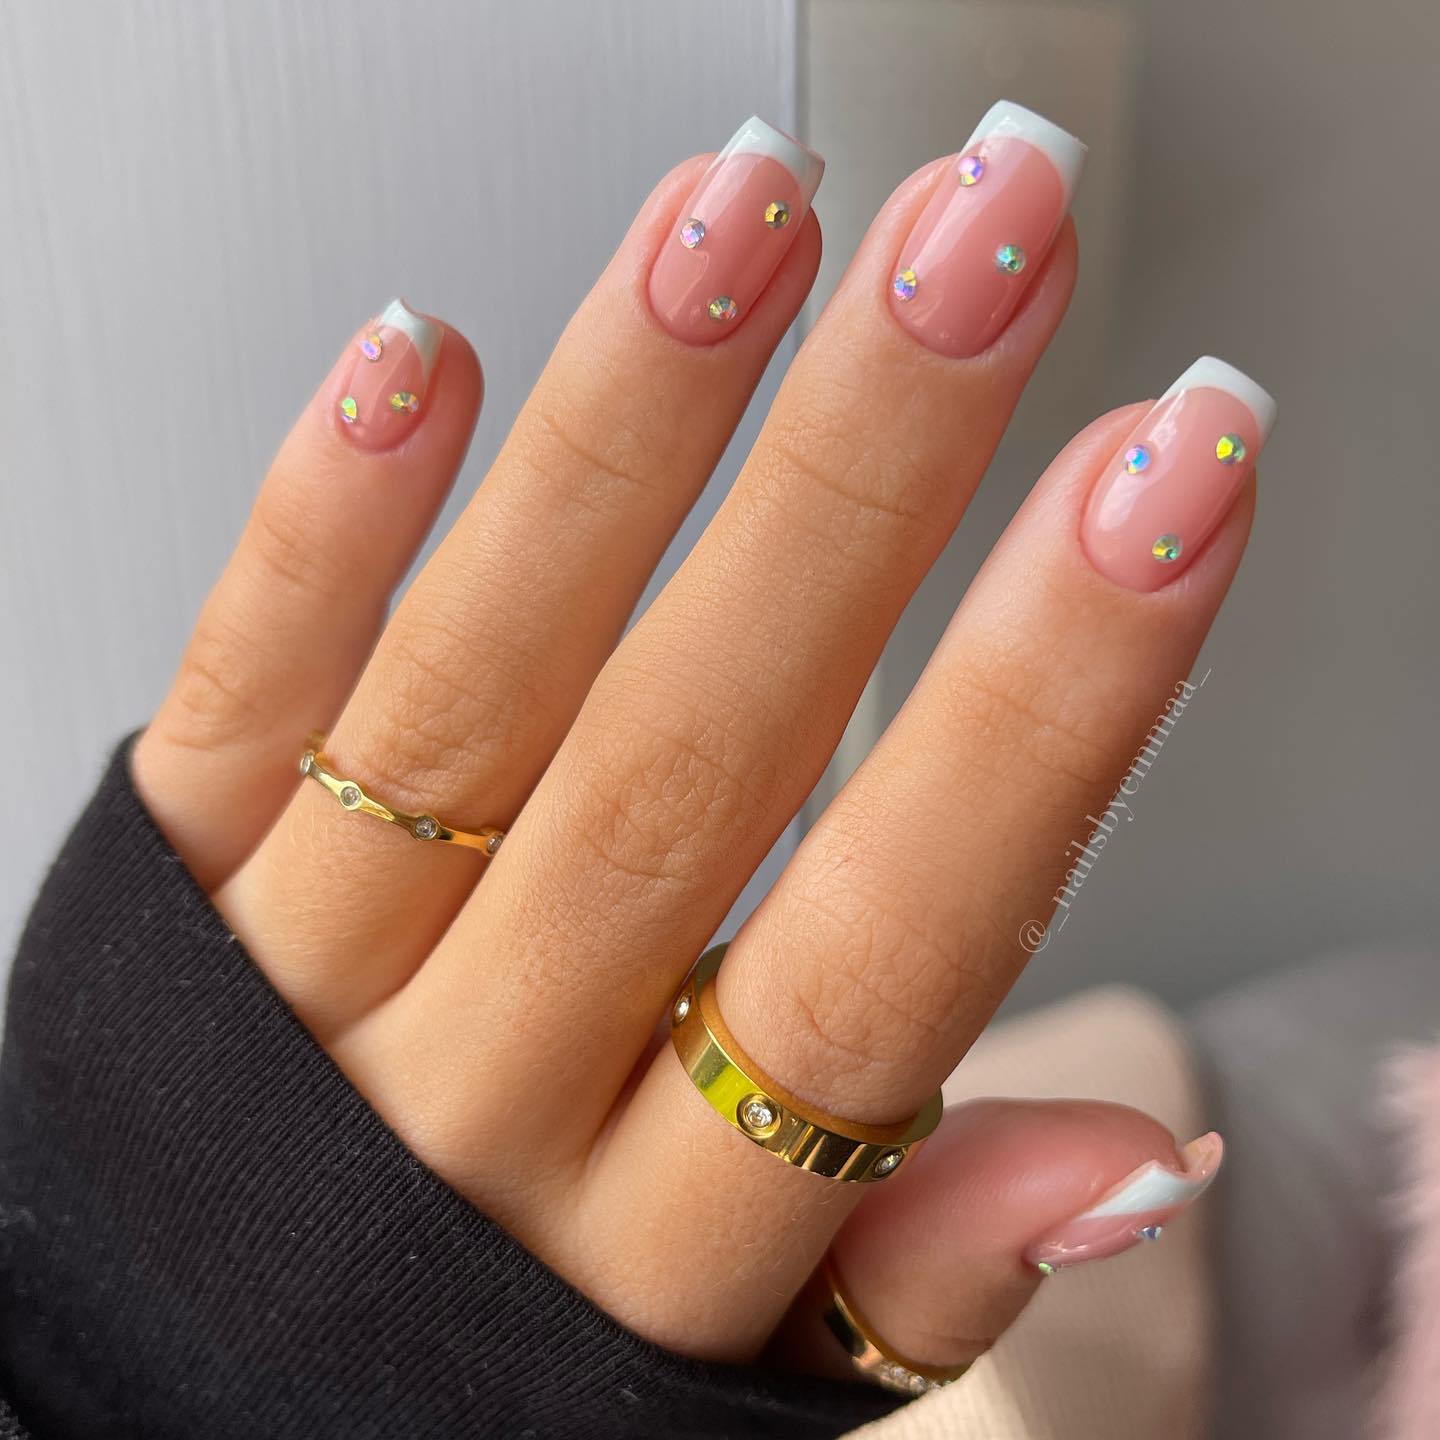 50 Best Nail Designs Trends To Try Out In 2022 images 1